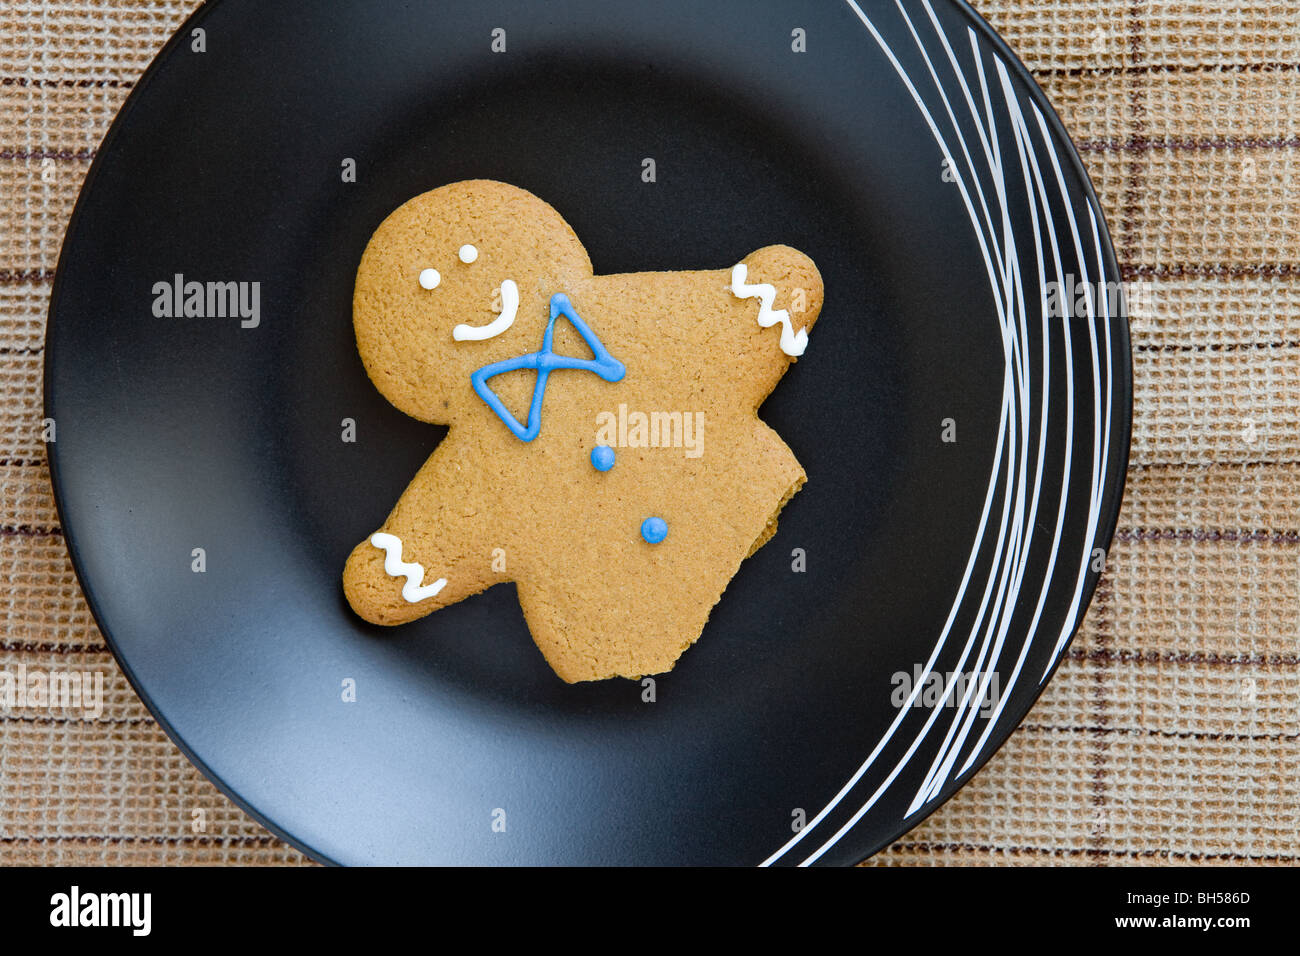 ginger bread man remains on the plate Stock Photo